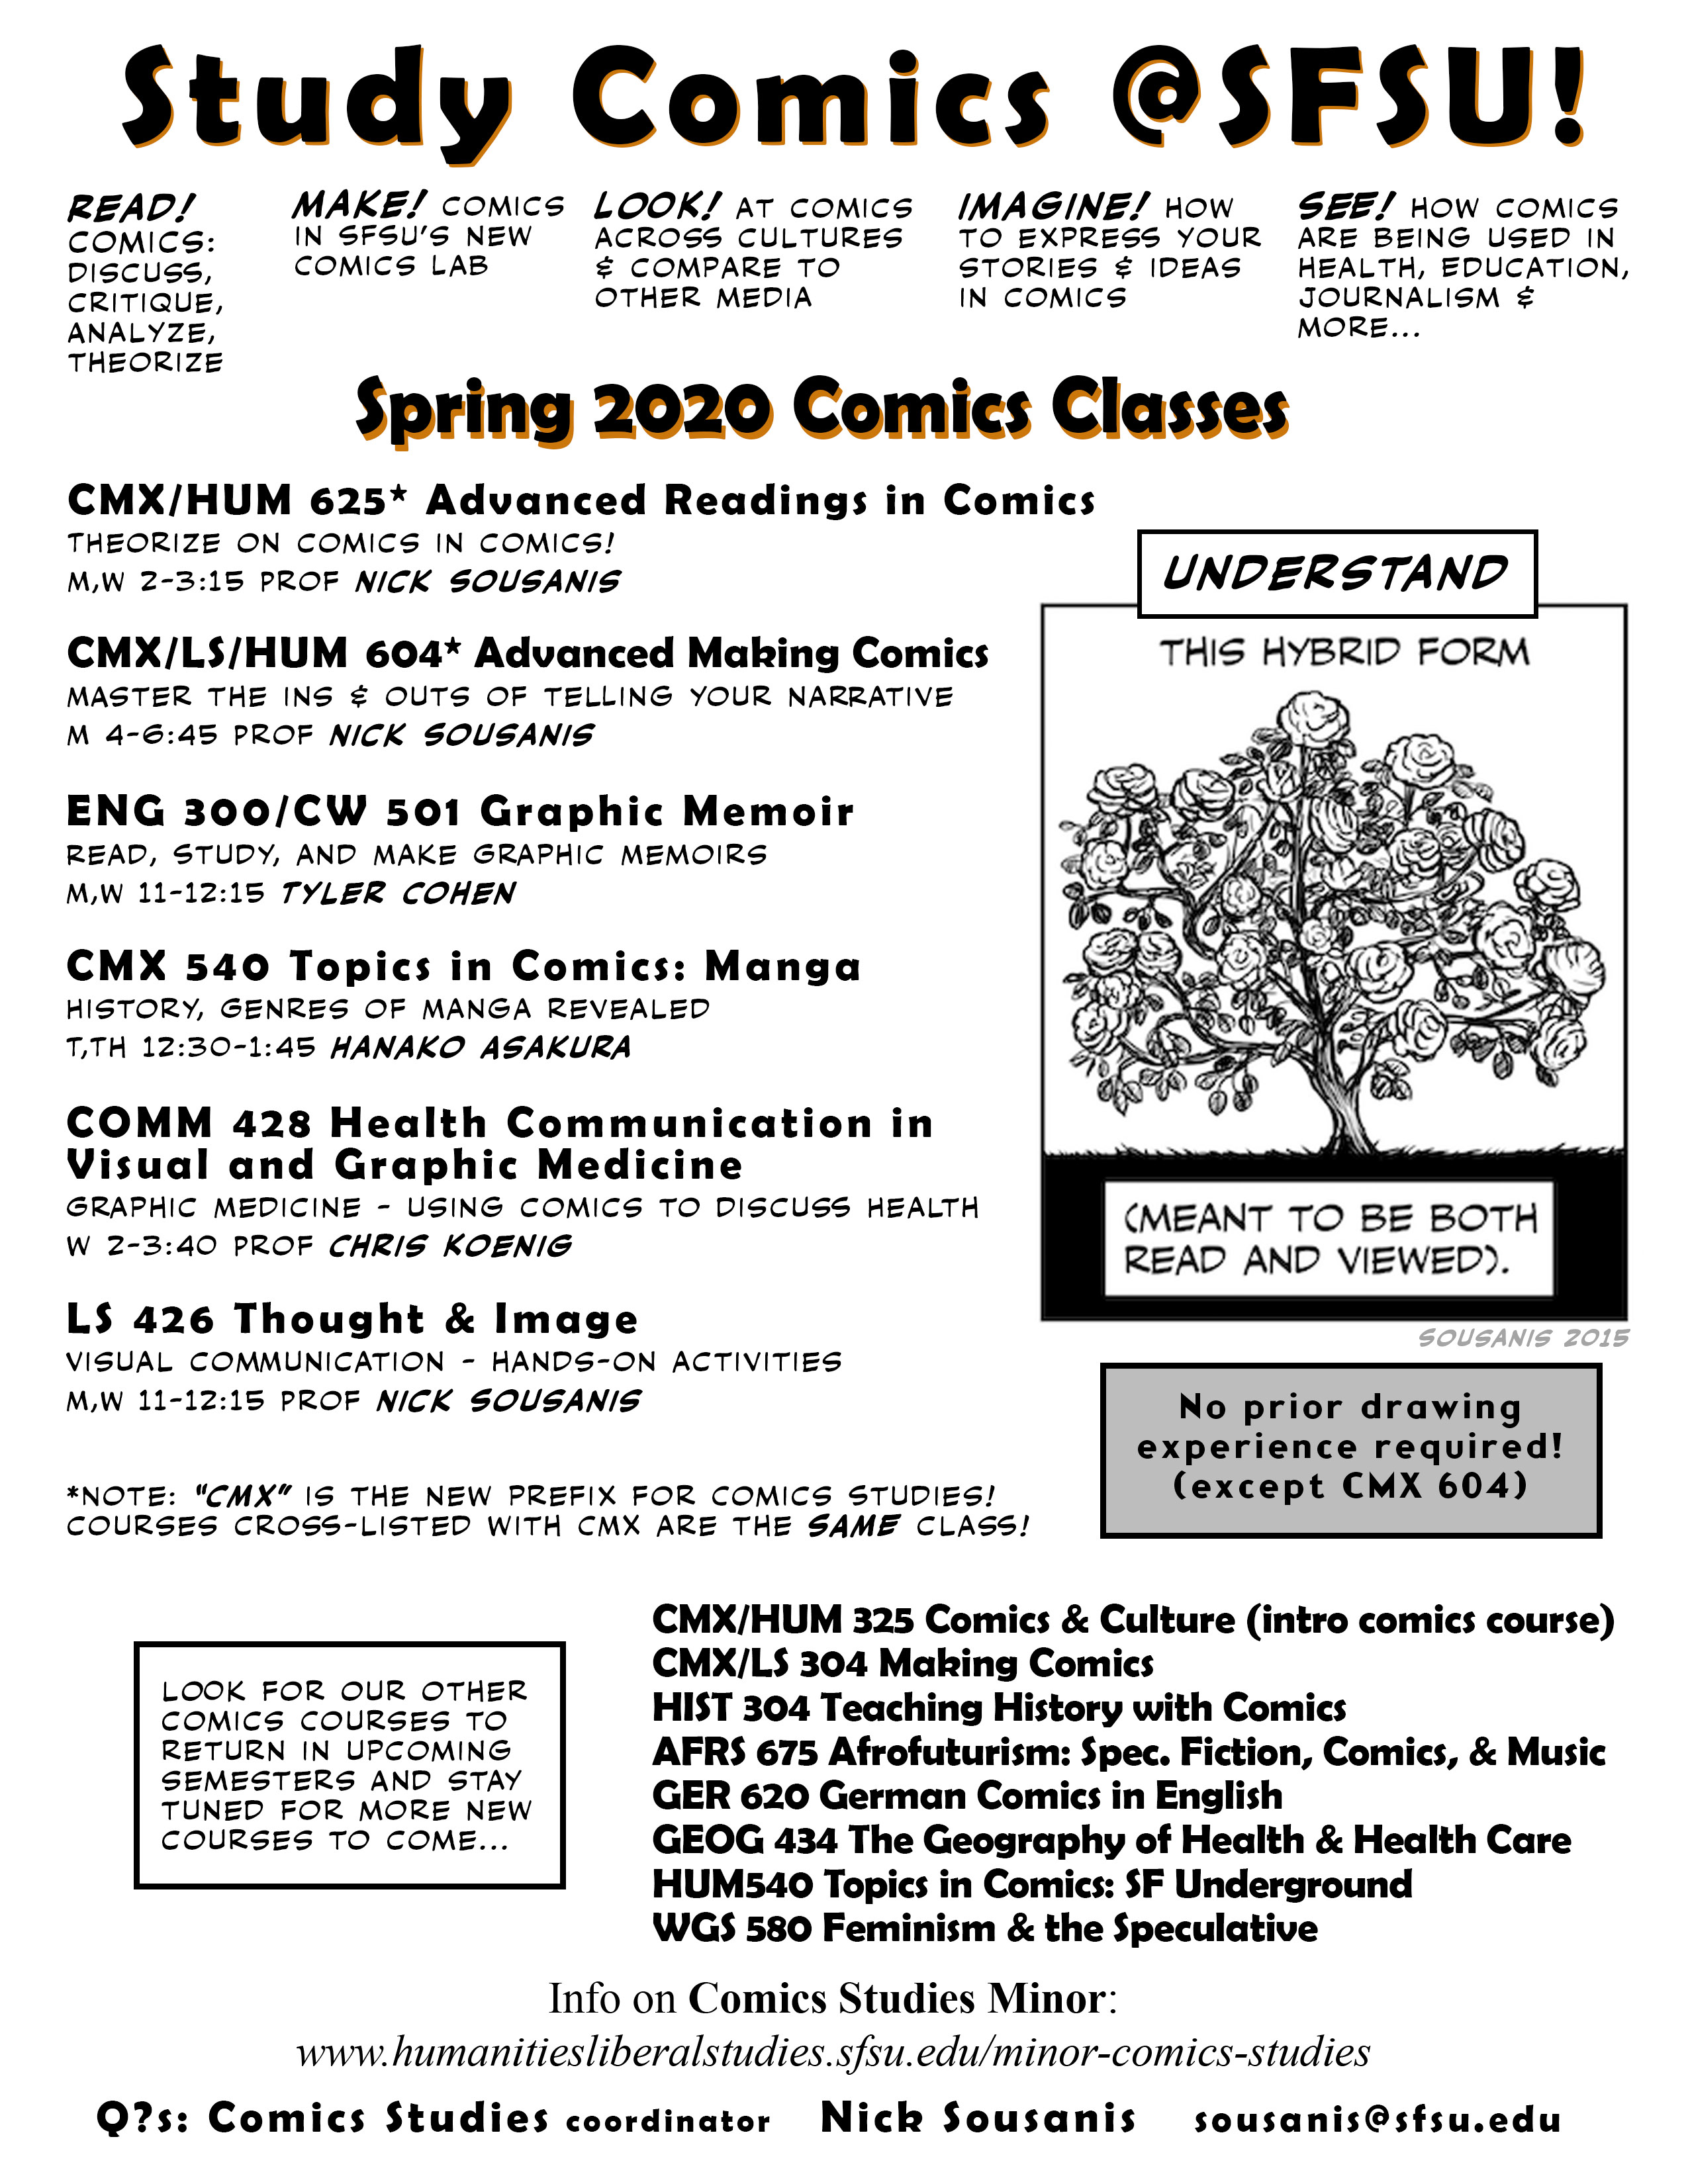 Spring 2020 Courses